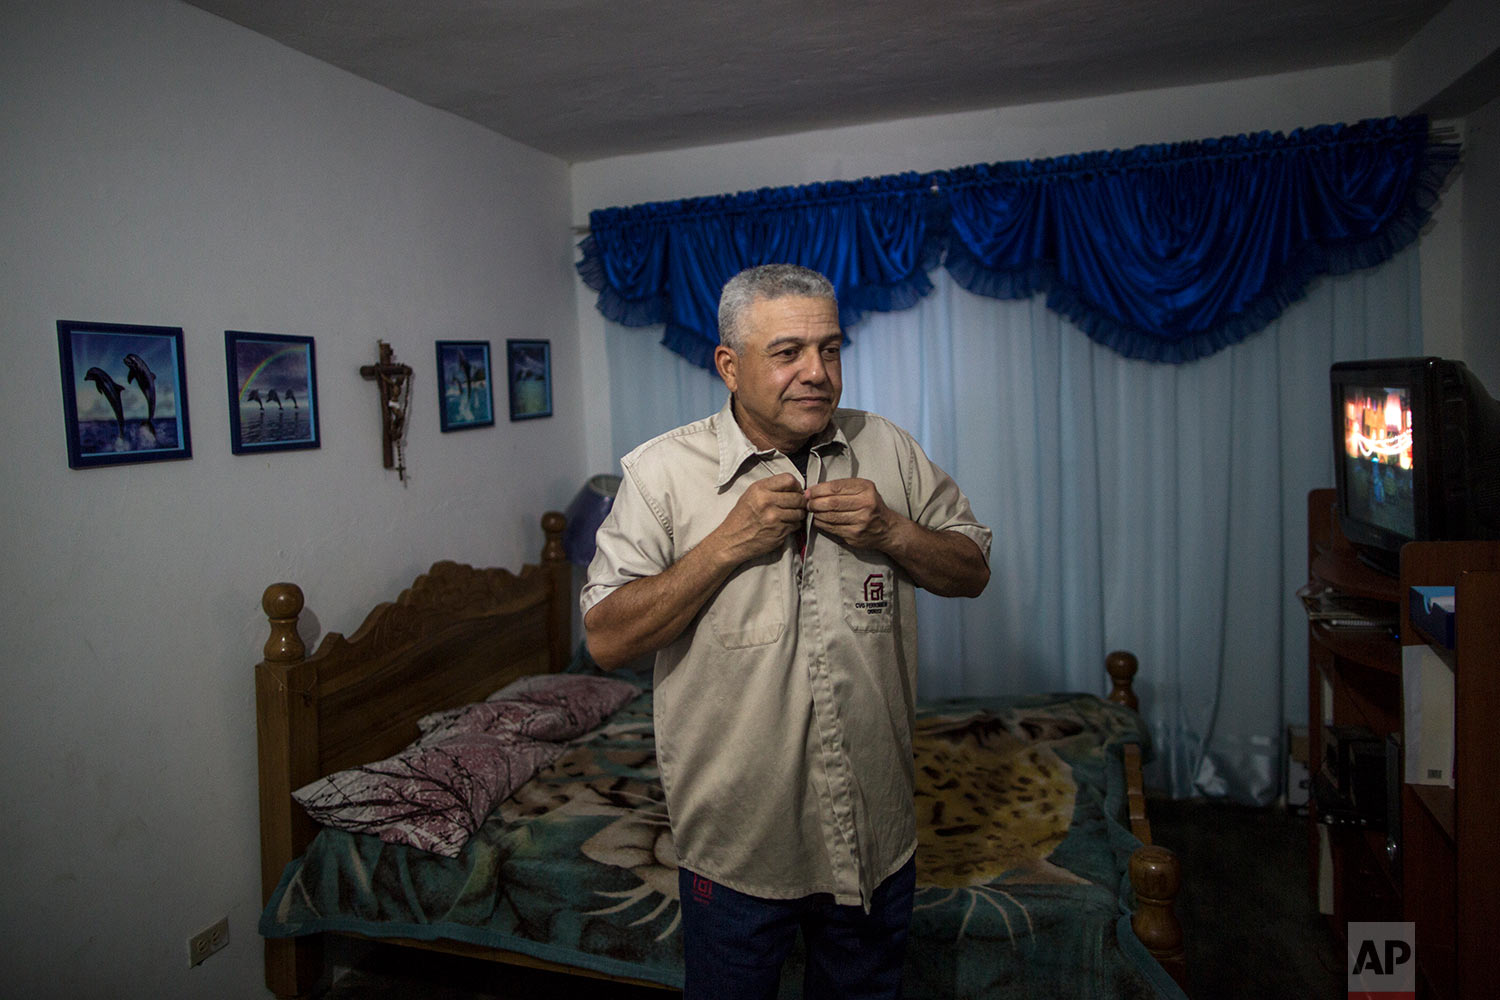  In this Nov. 5, 2017 photo, Tony Franco, who has worked for Ferrominera Orinoco for more than 28 years, puts on his uniform before leaving for the night shift, in Ciudad Guyana, Bolivar state, Venezuela. Franco had to sell his car and now walks seve